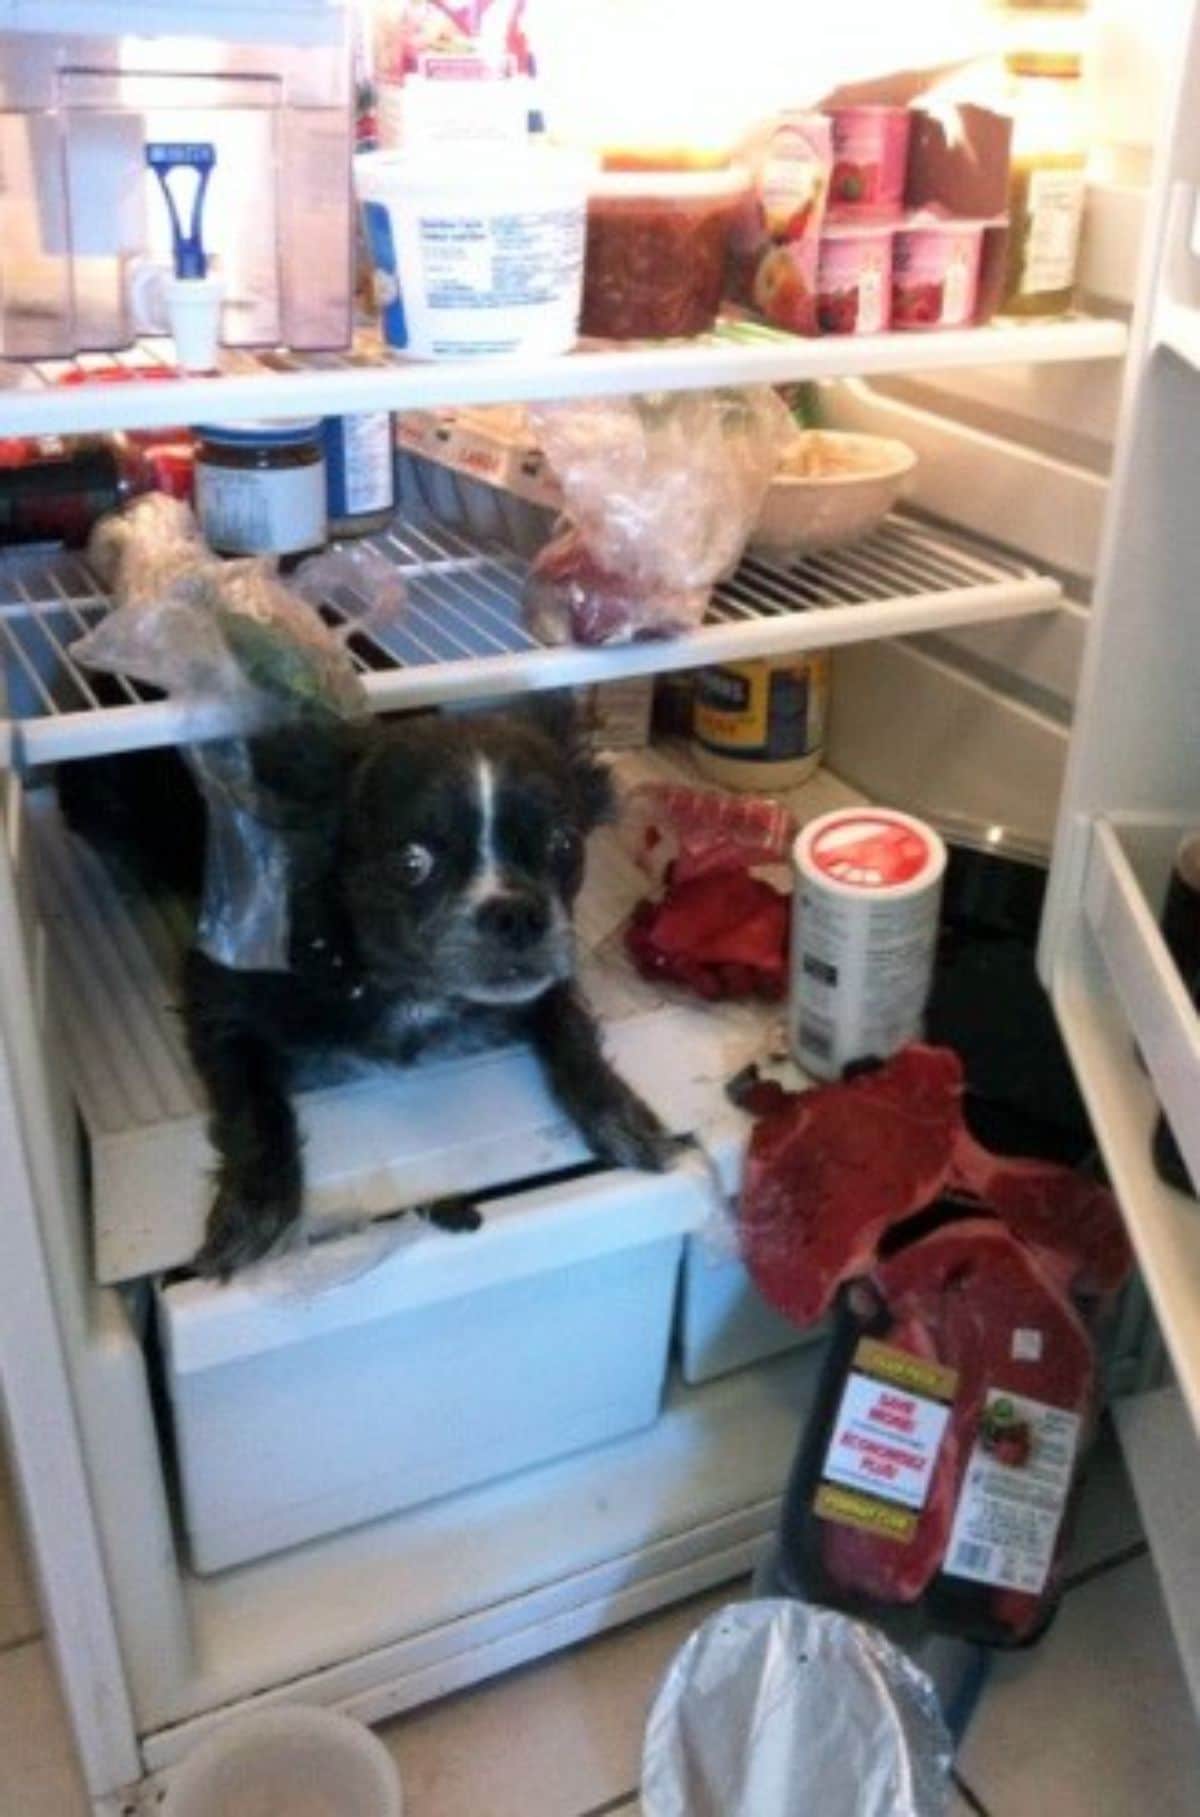 black and white french bulldog inside a fridge with food fallen out